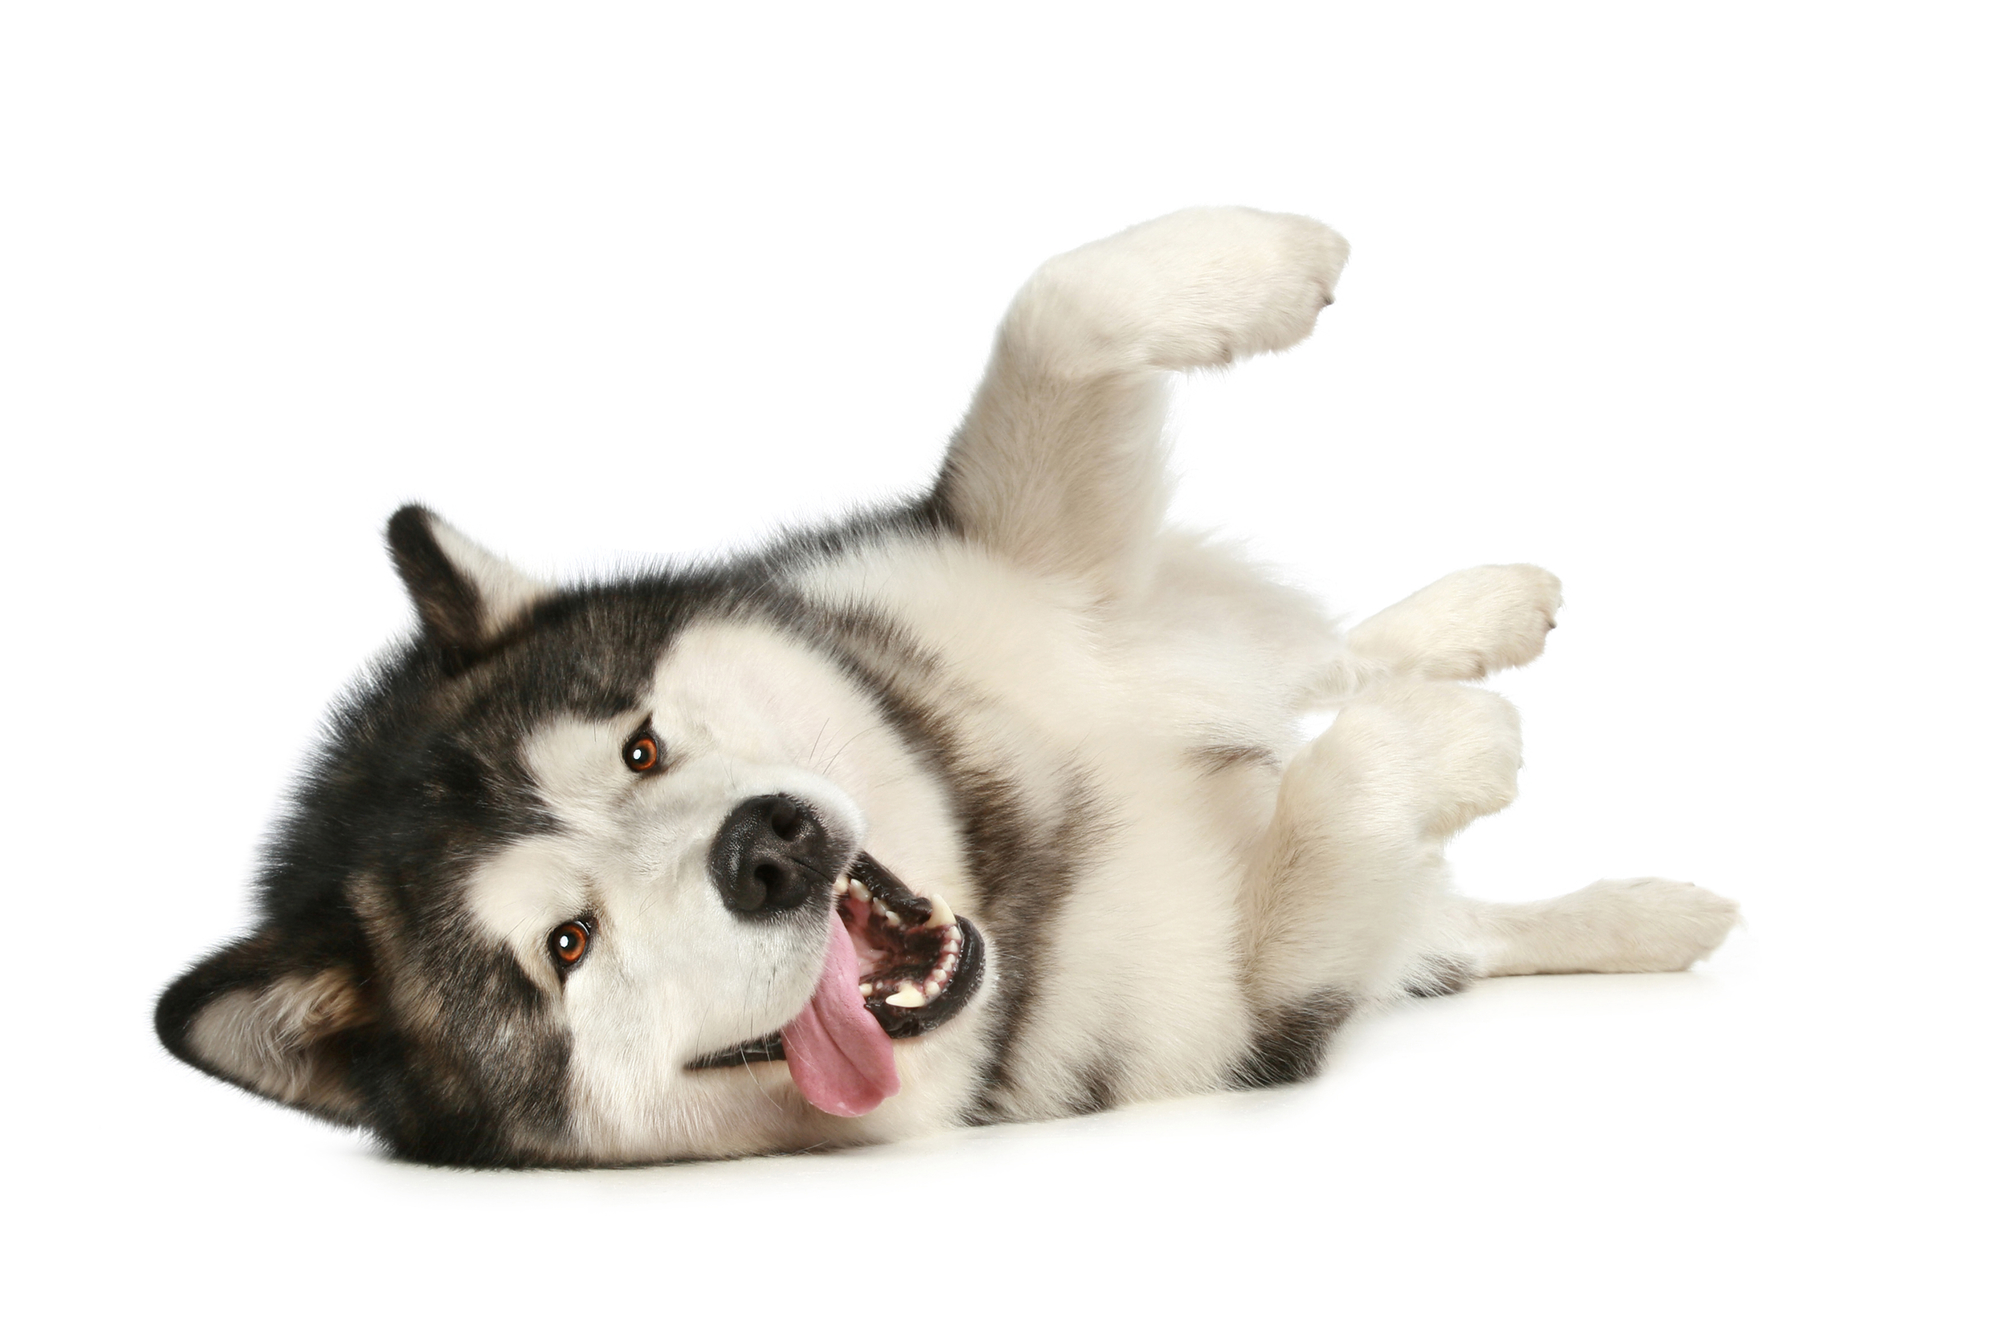 7 Things To Know Before Getting An Alaskan Malamute Animalso